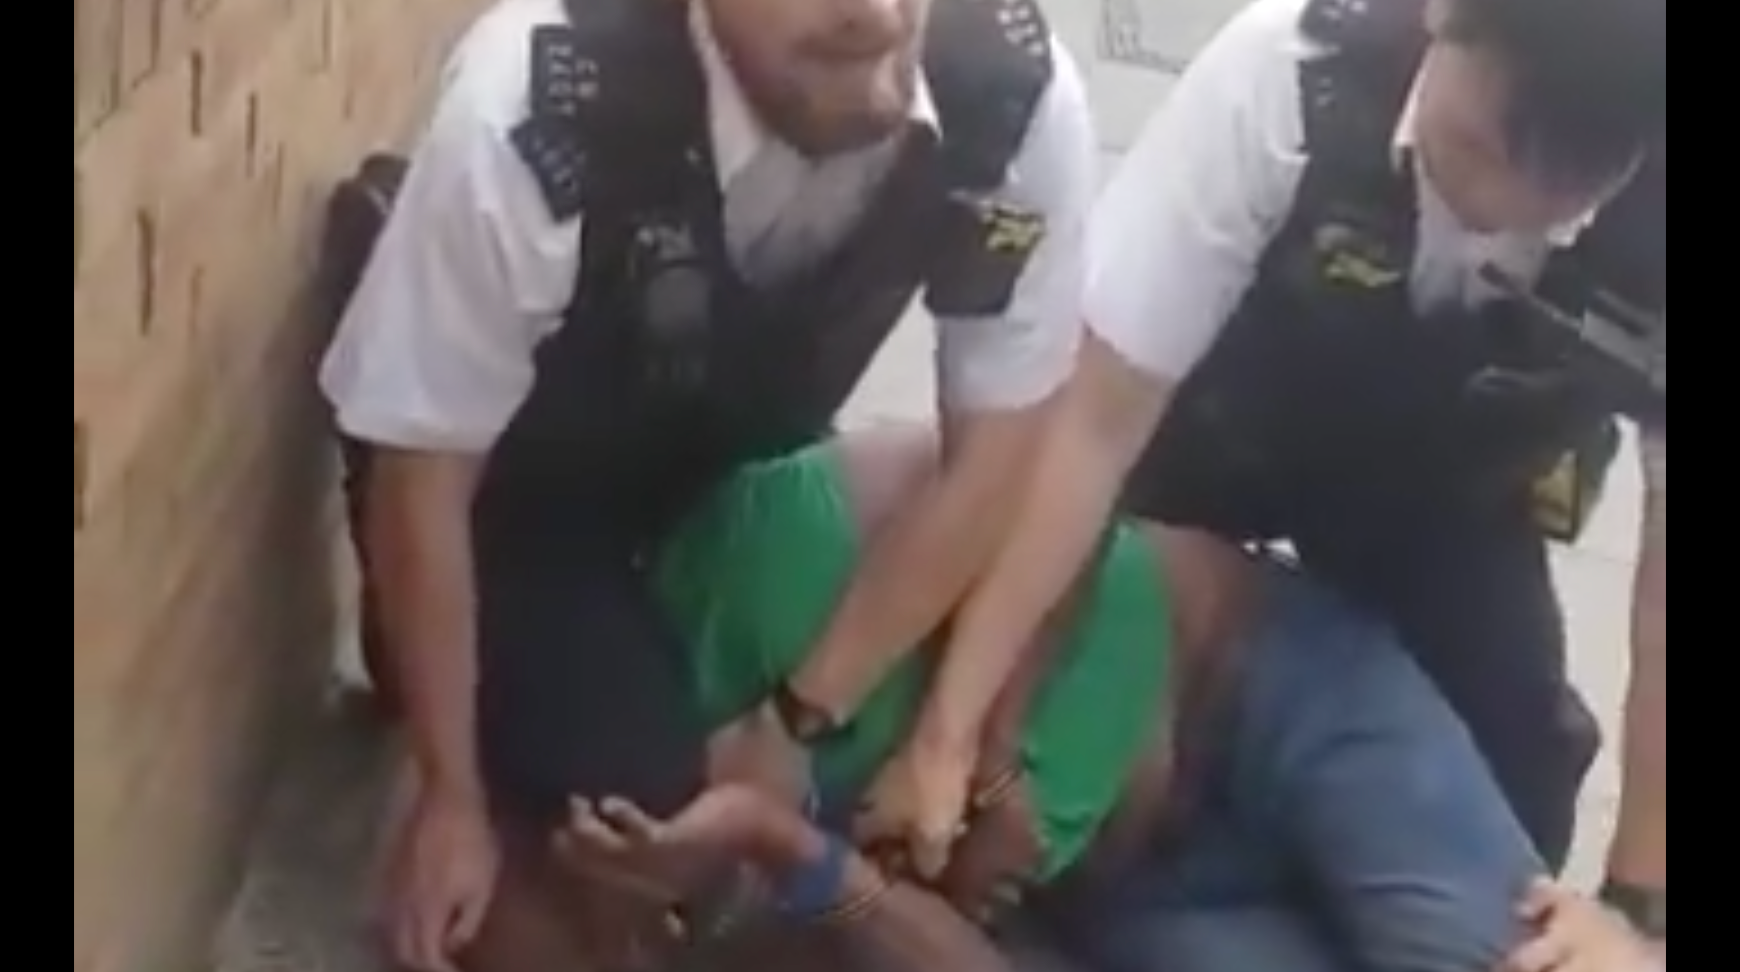 police knee on neck incident in islington